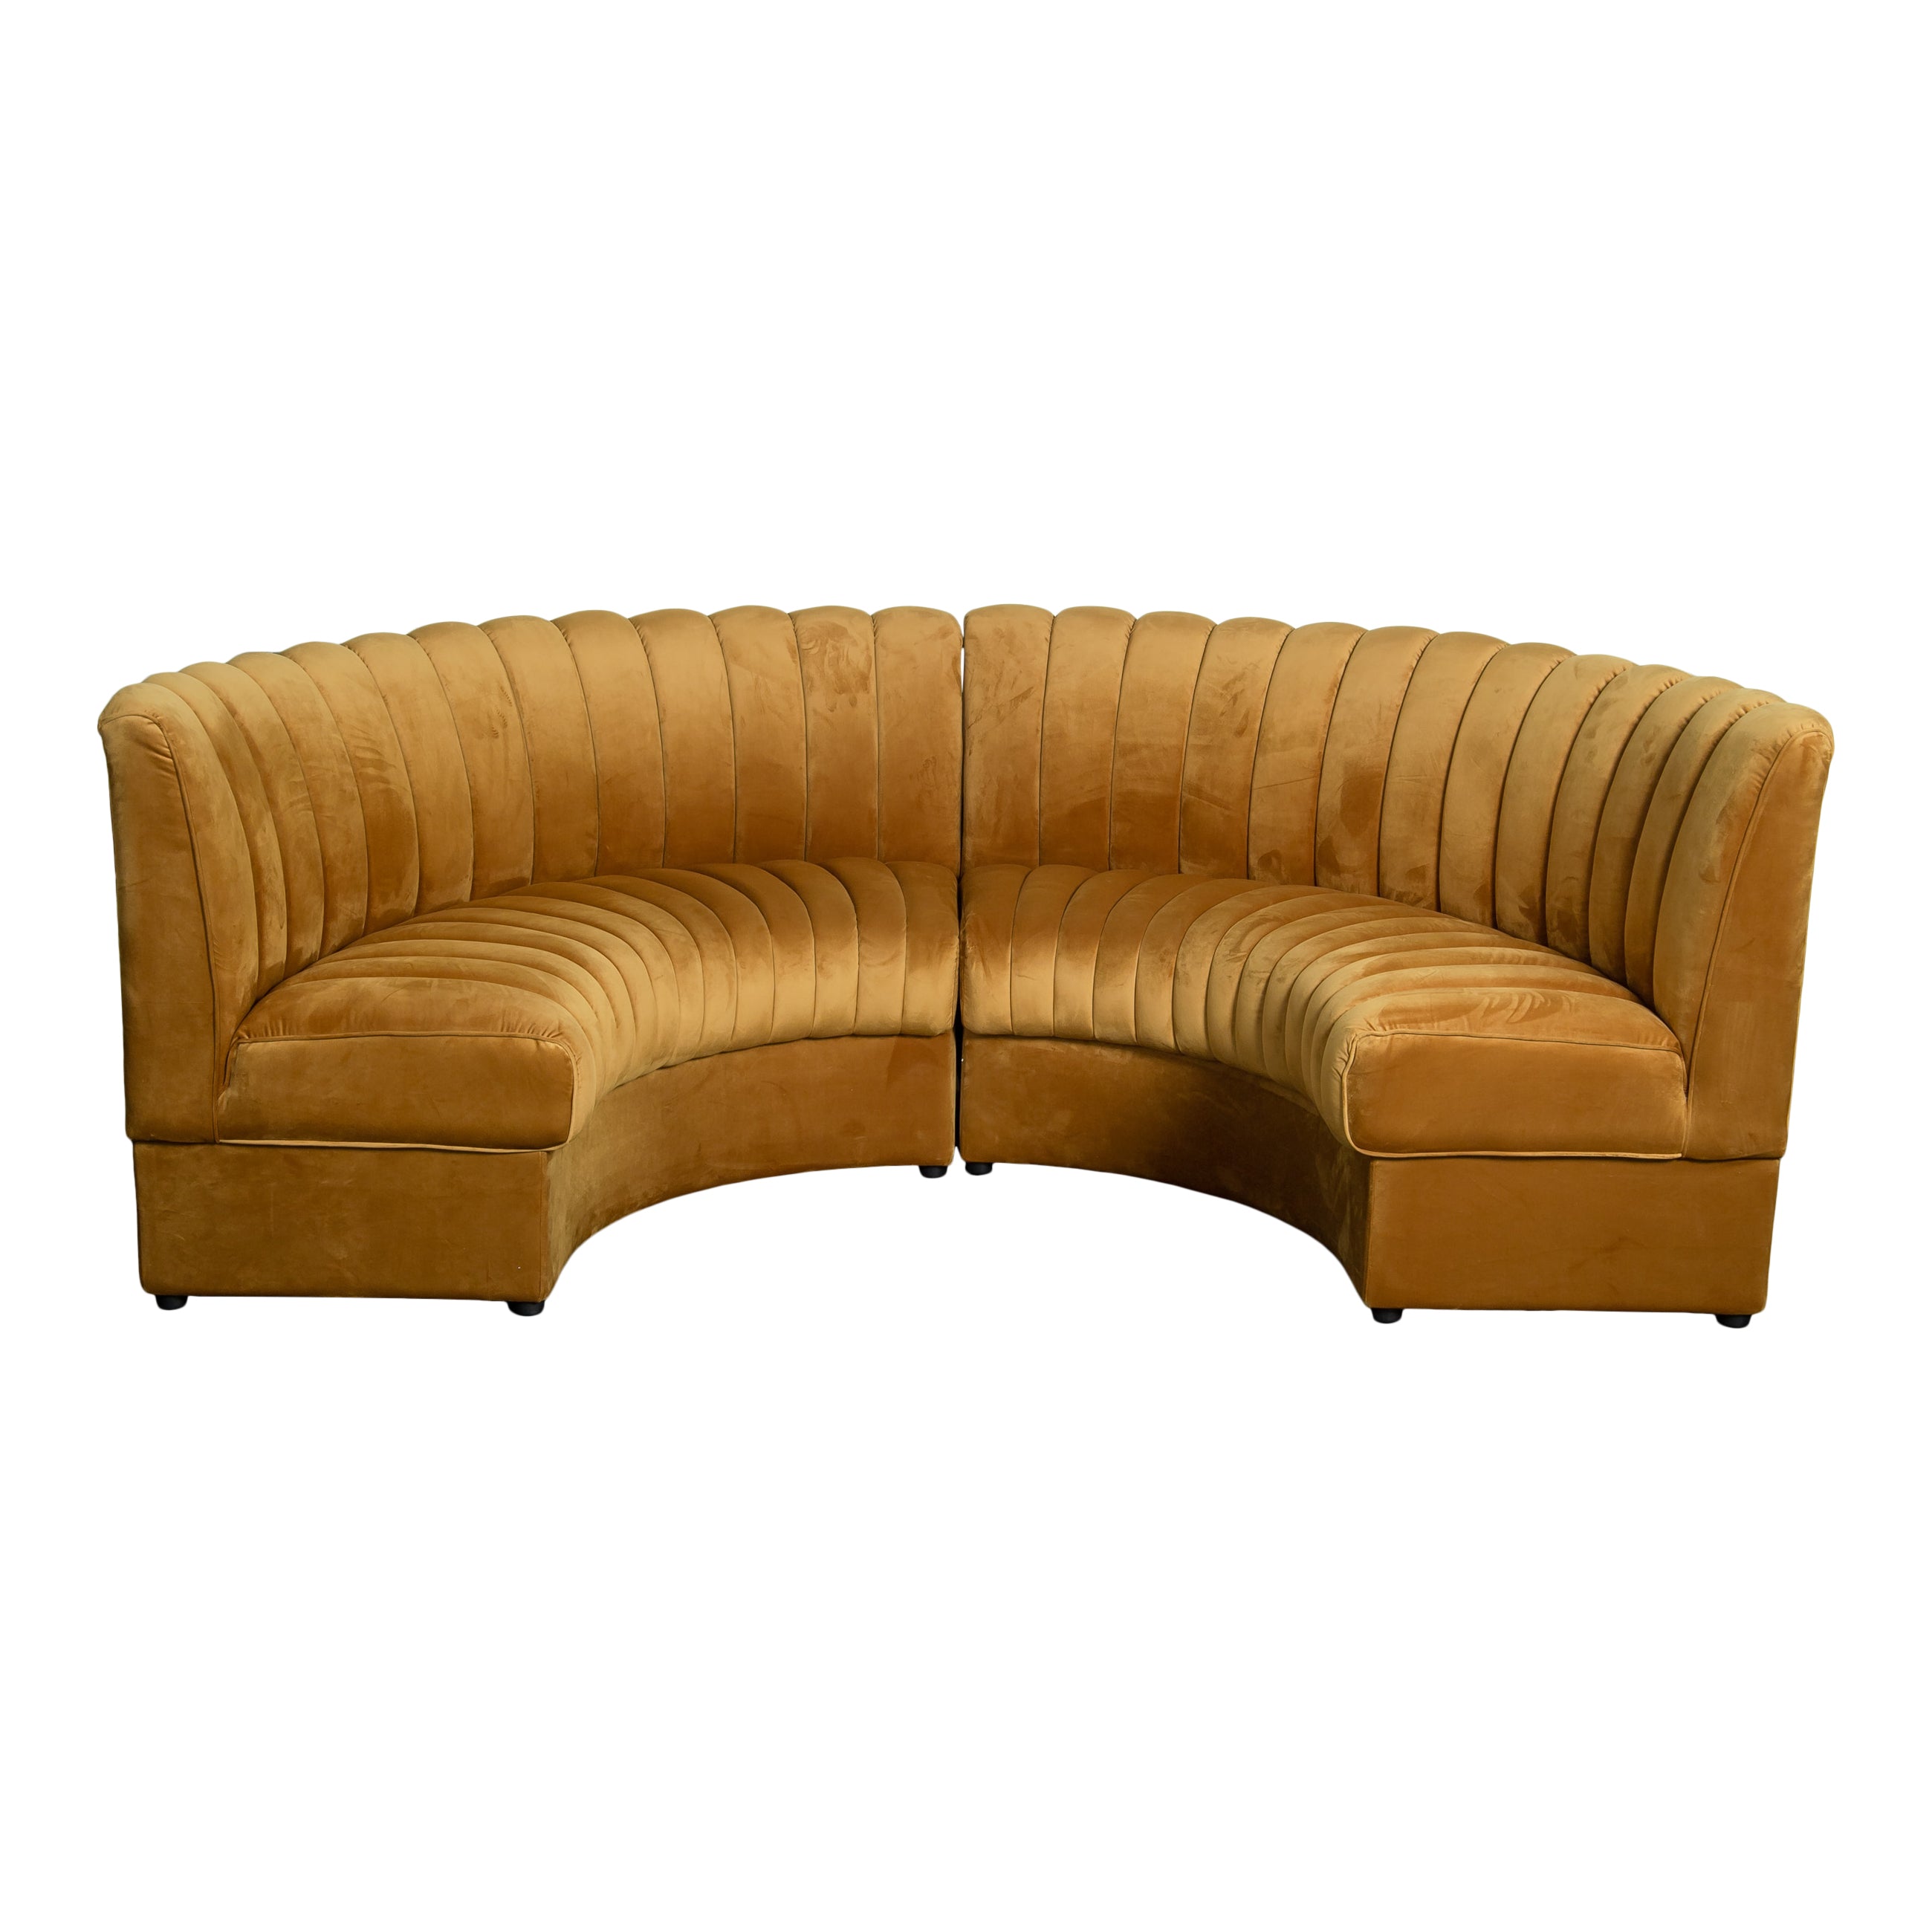 Louise Gold Banquette Couch